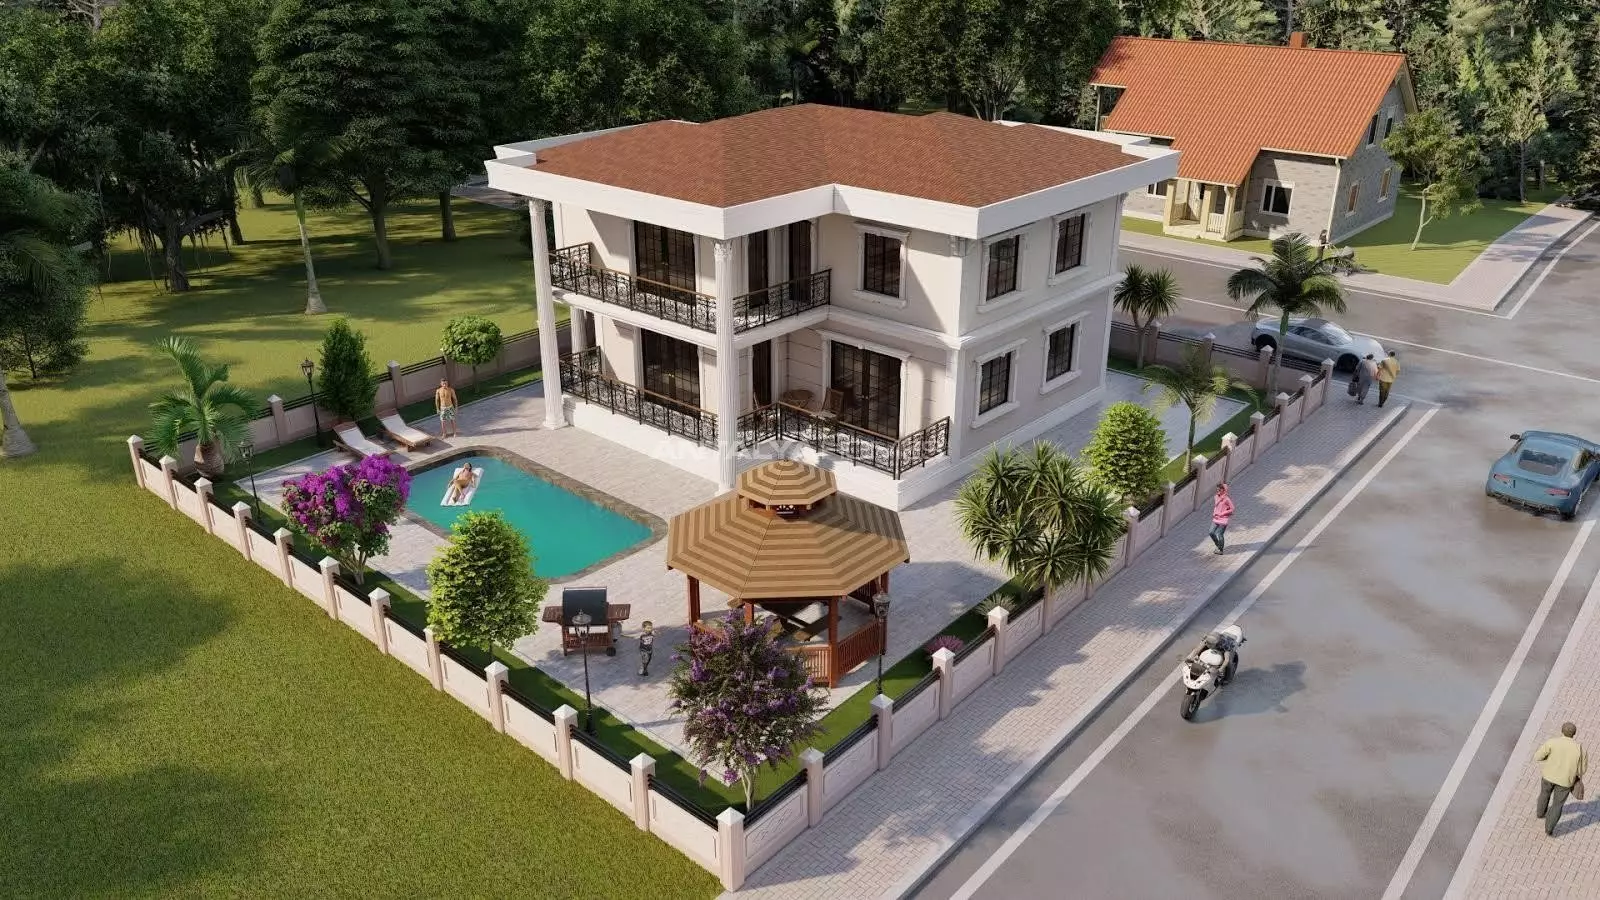 Detached Villas for Sale Close to Golf Courses in Belek